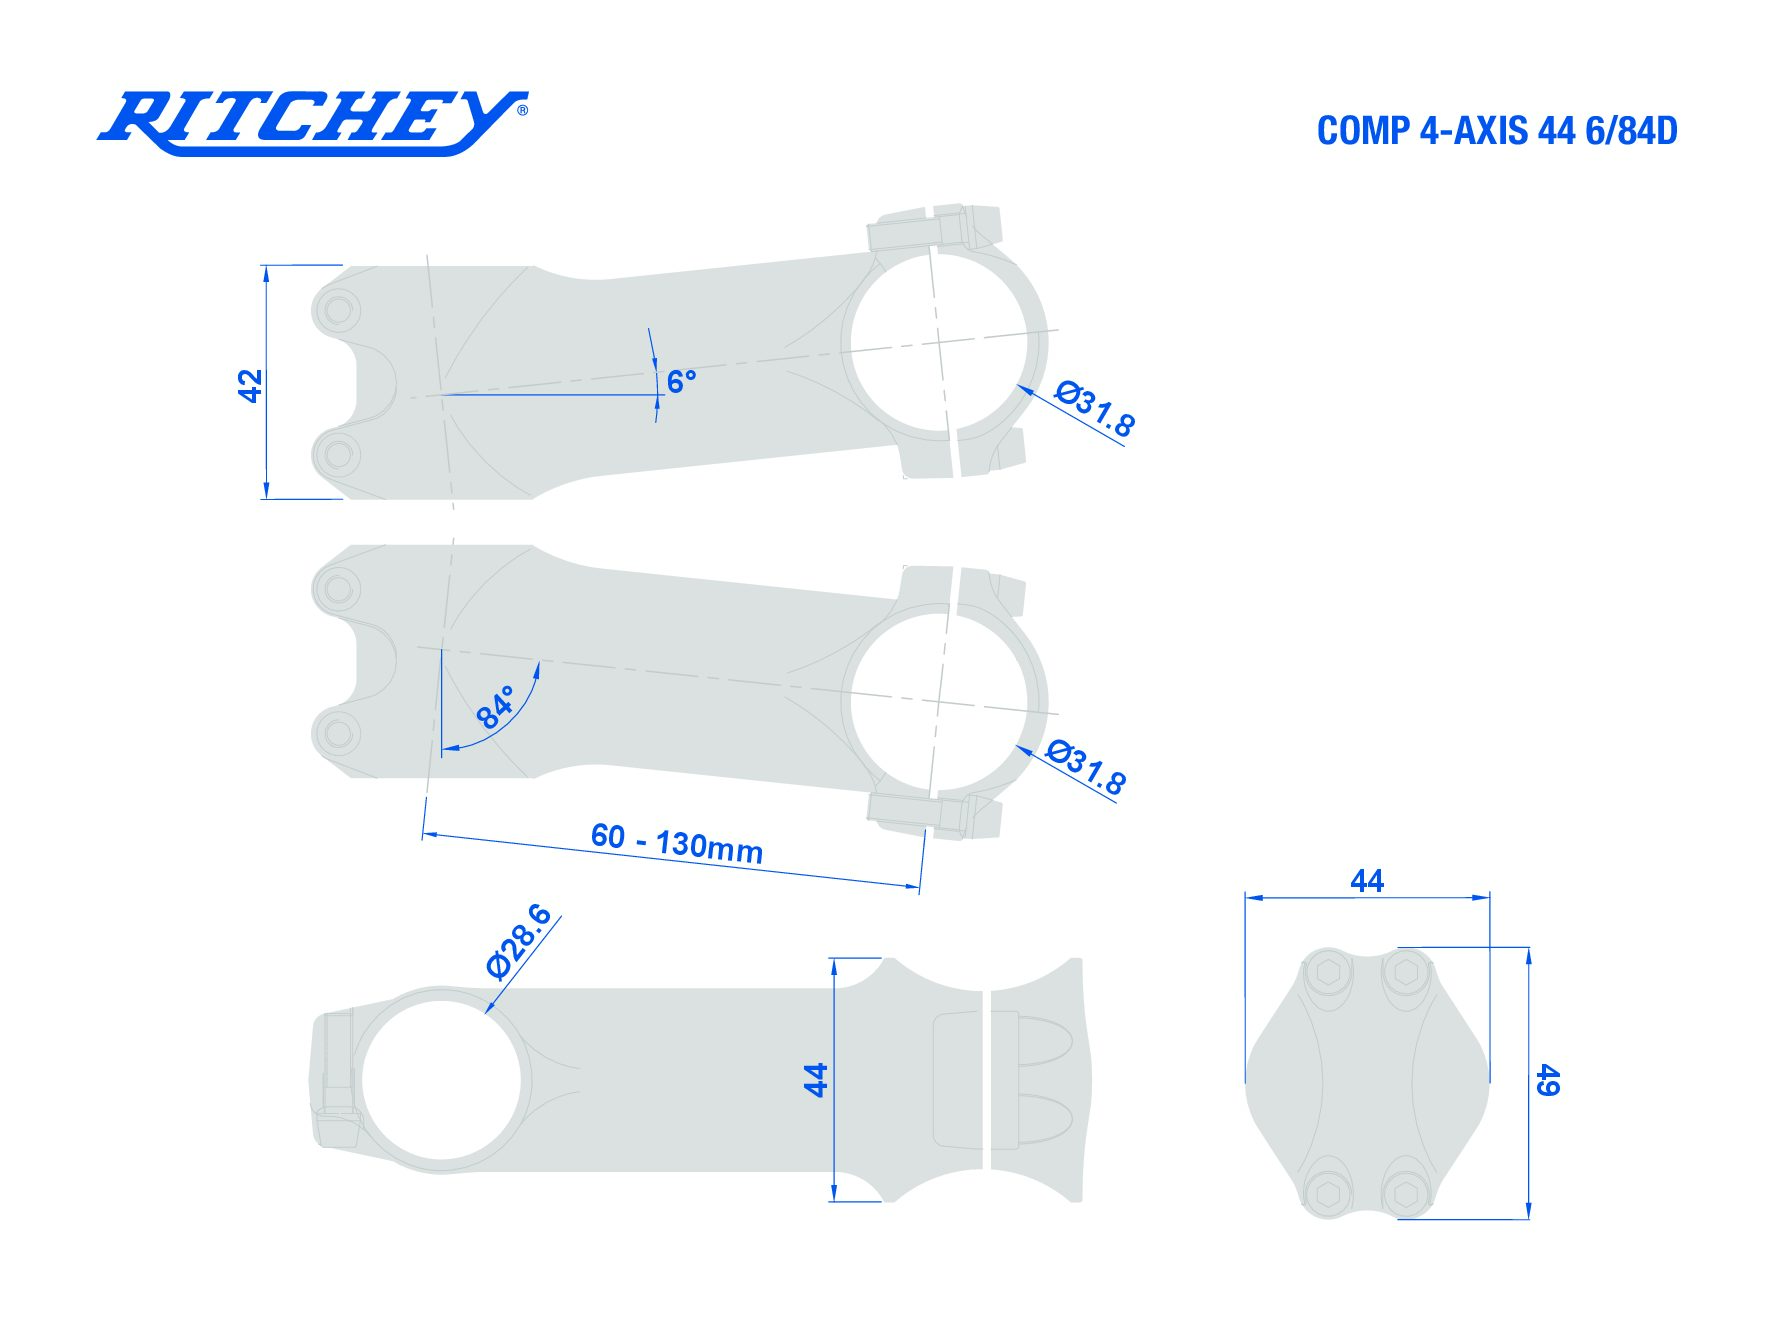 Potence Ritchey Comp 4-Axis 6° 1’1/8